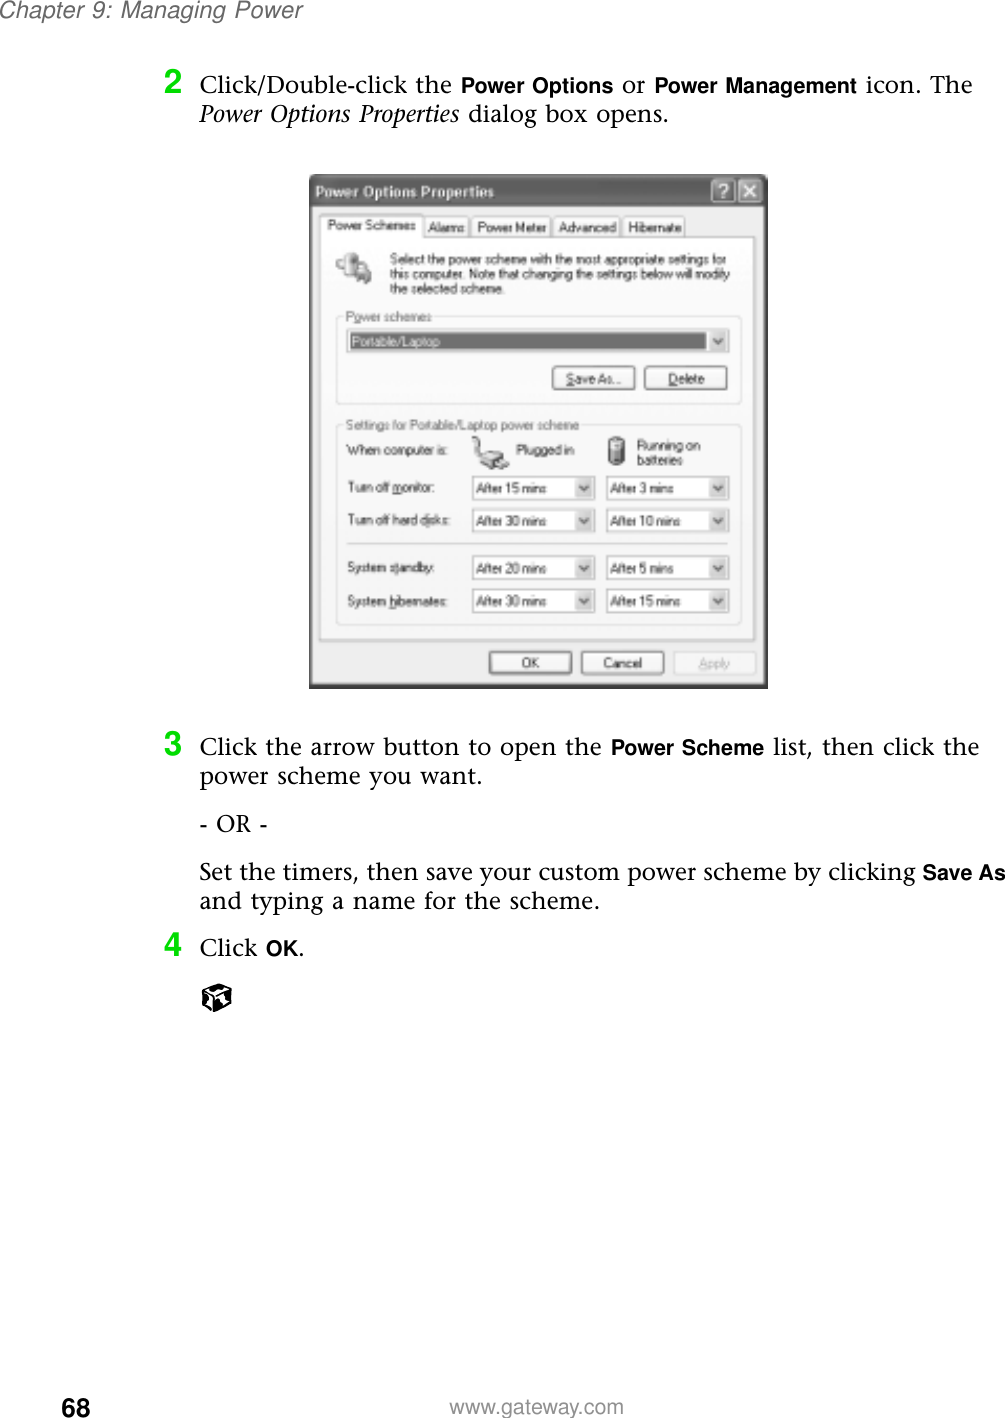 68Chapter 9: Managing Powerwww.gateway.com2Click/Double-click the Power Options or Power Management icon. The Power Options Properties dialog box opens.3Click the arrow button to open the Power Scheme list, then click the power scheme you want.- OR -Set the timers, then save your custom power scheme by clicking Save As and typing a name for the scheme.4Click OK.